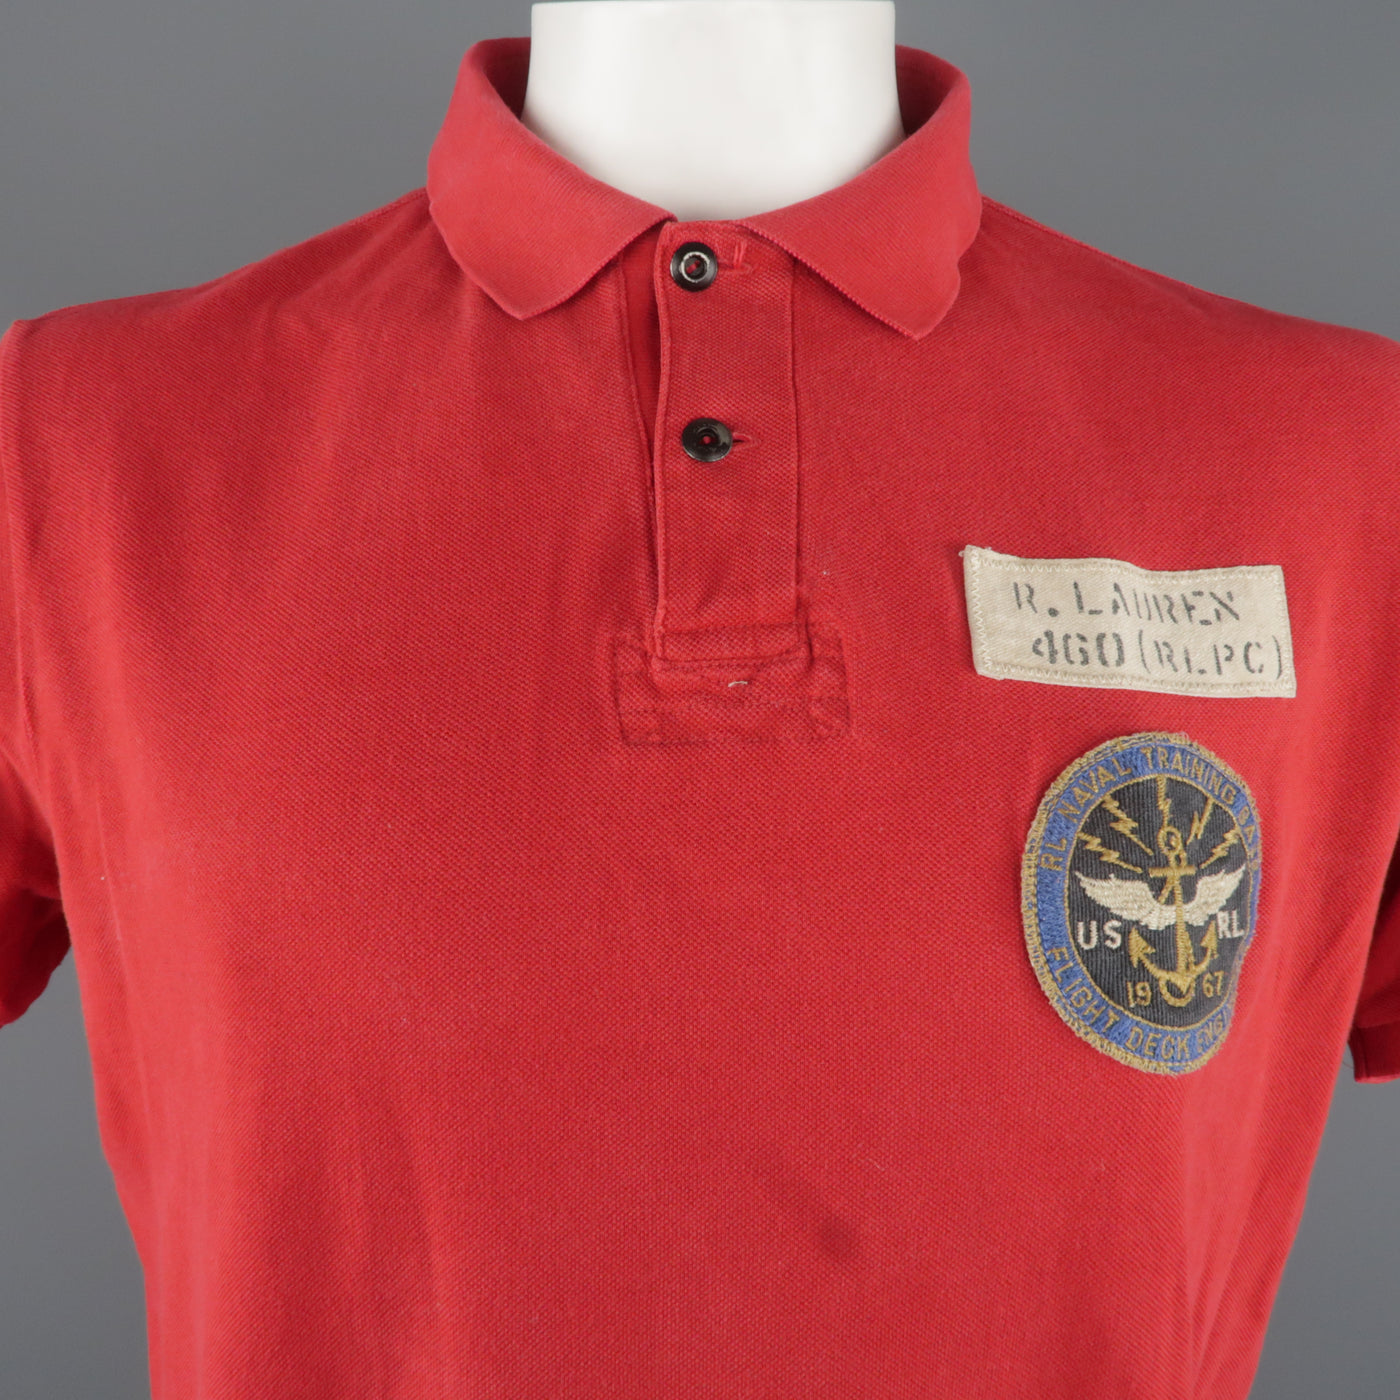 RALPH LAUREN Size XL Red Solid Cotton Buttoned POLO Shirt